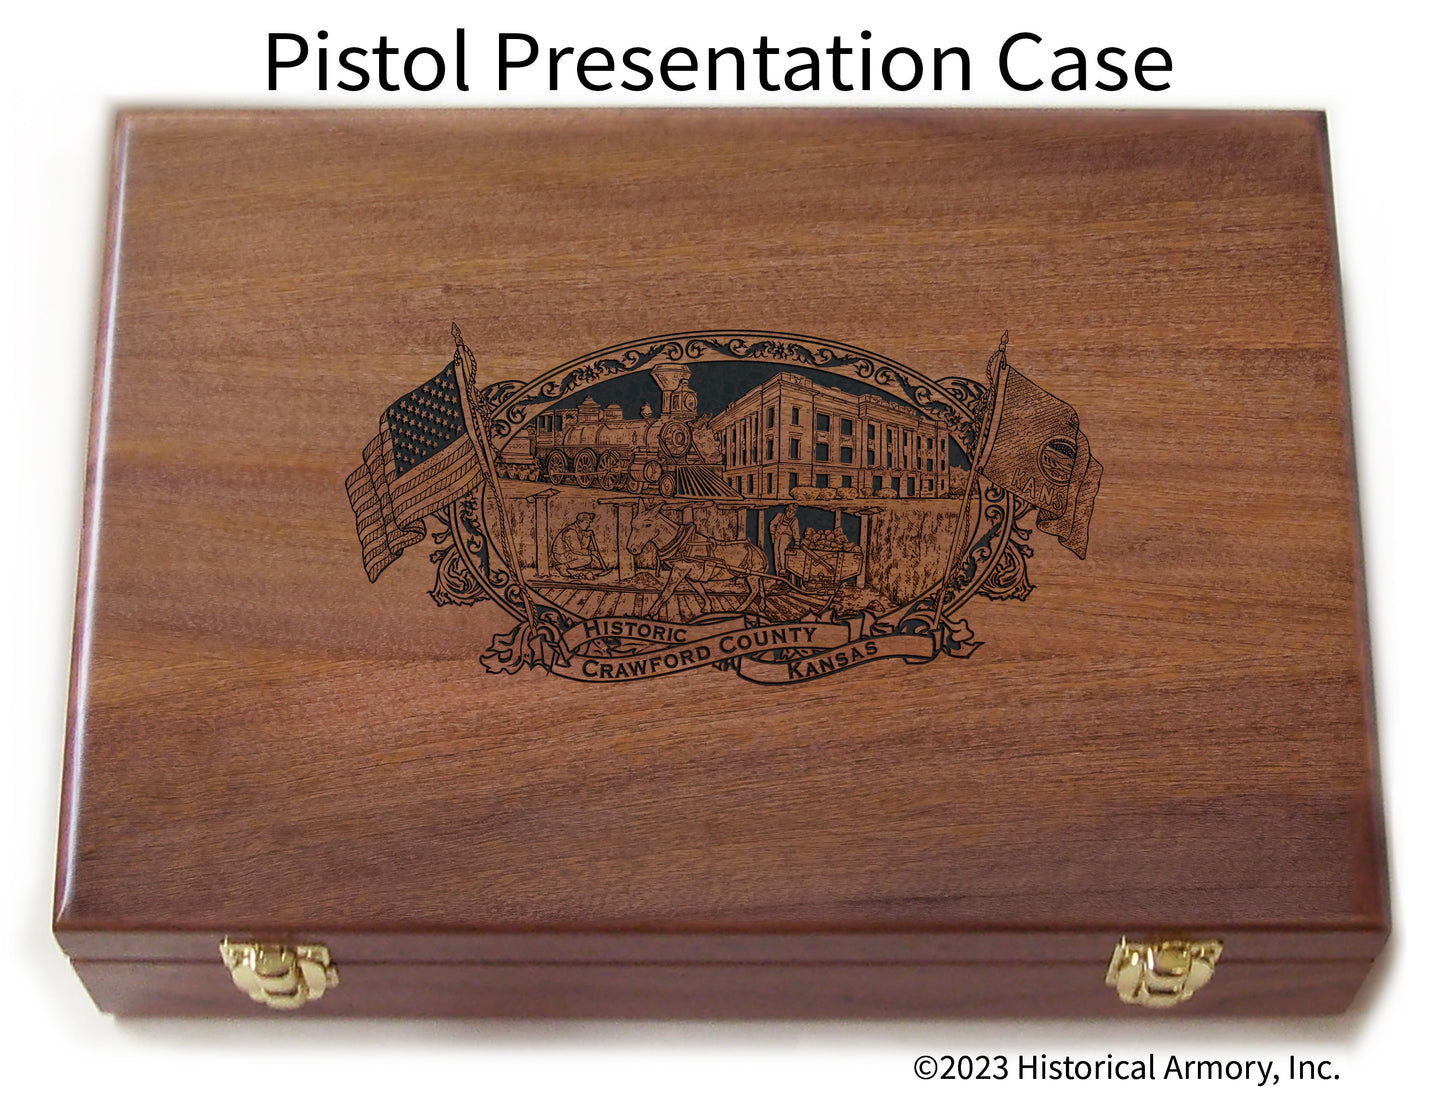 Crawford County Kansas Engraved .45 Auto Ruger 1911 Presentation Case